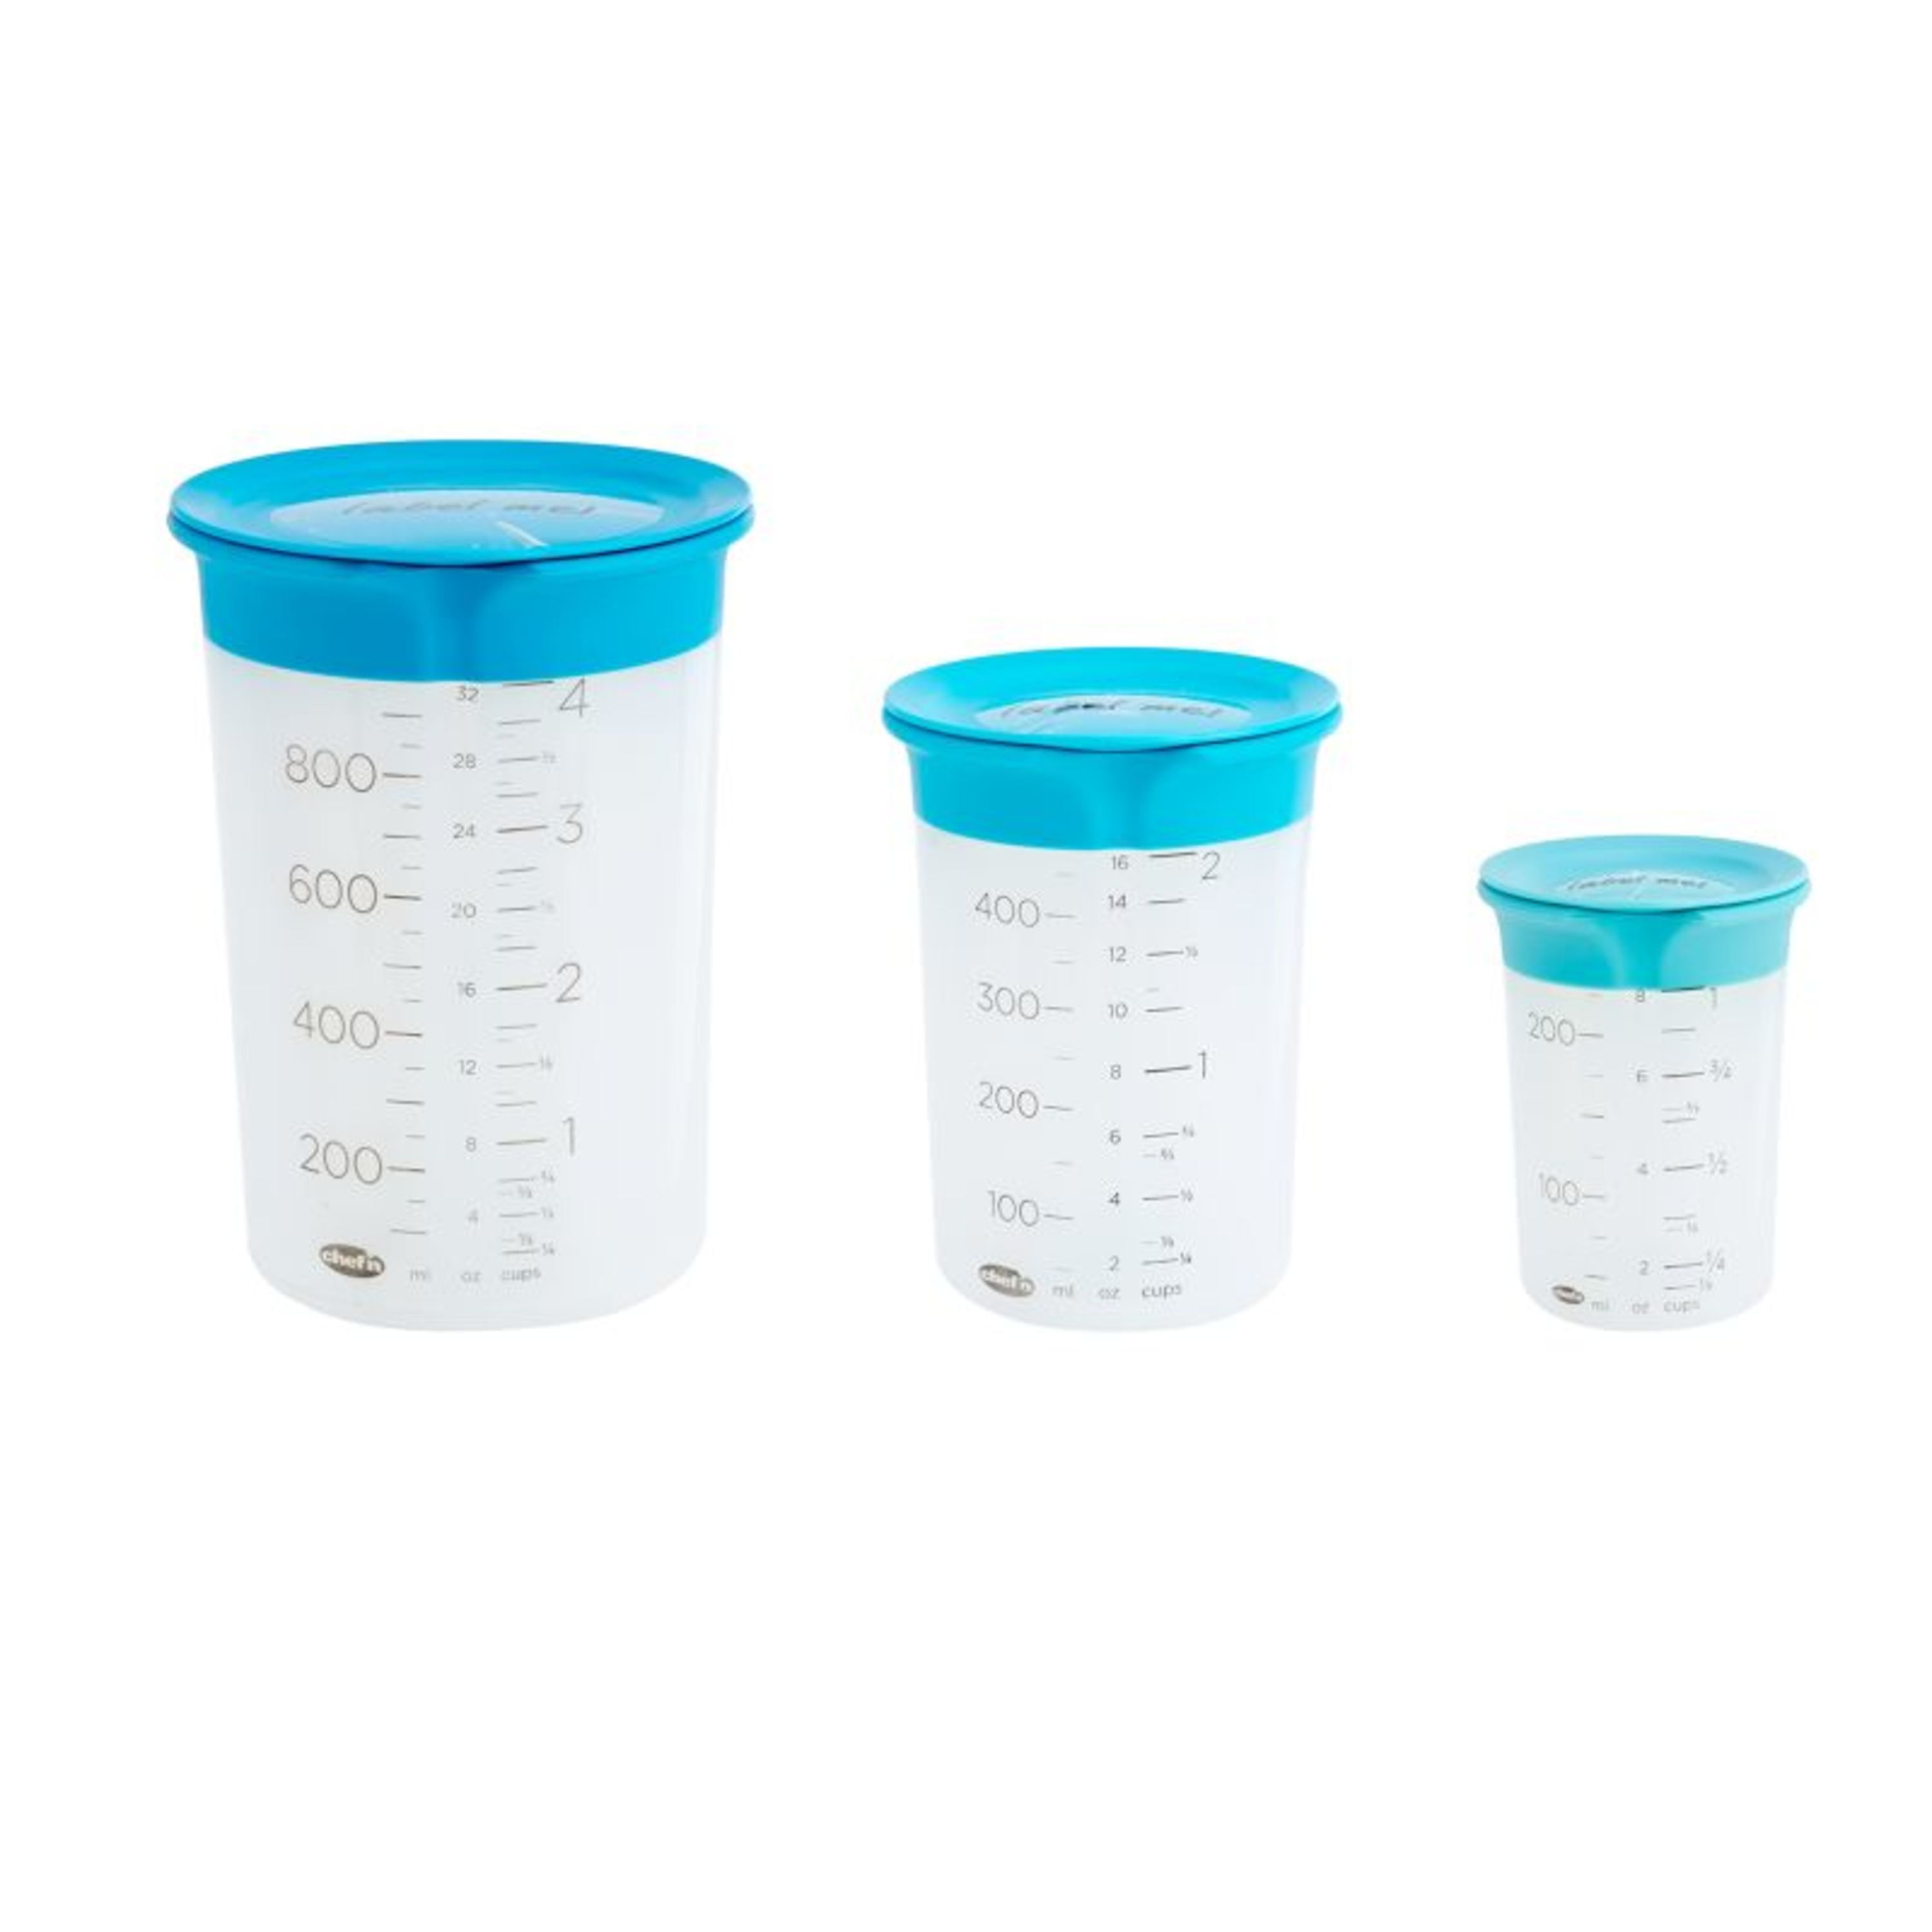 Chef'n SleekStor Collapsible Measuring Cup Set, Apricot